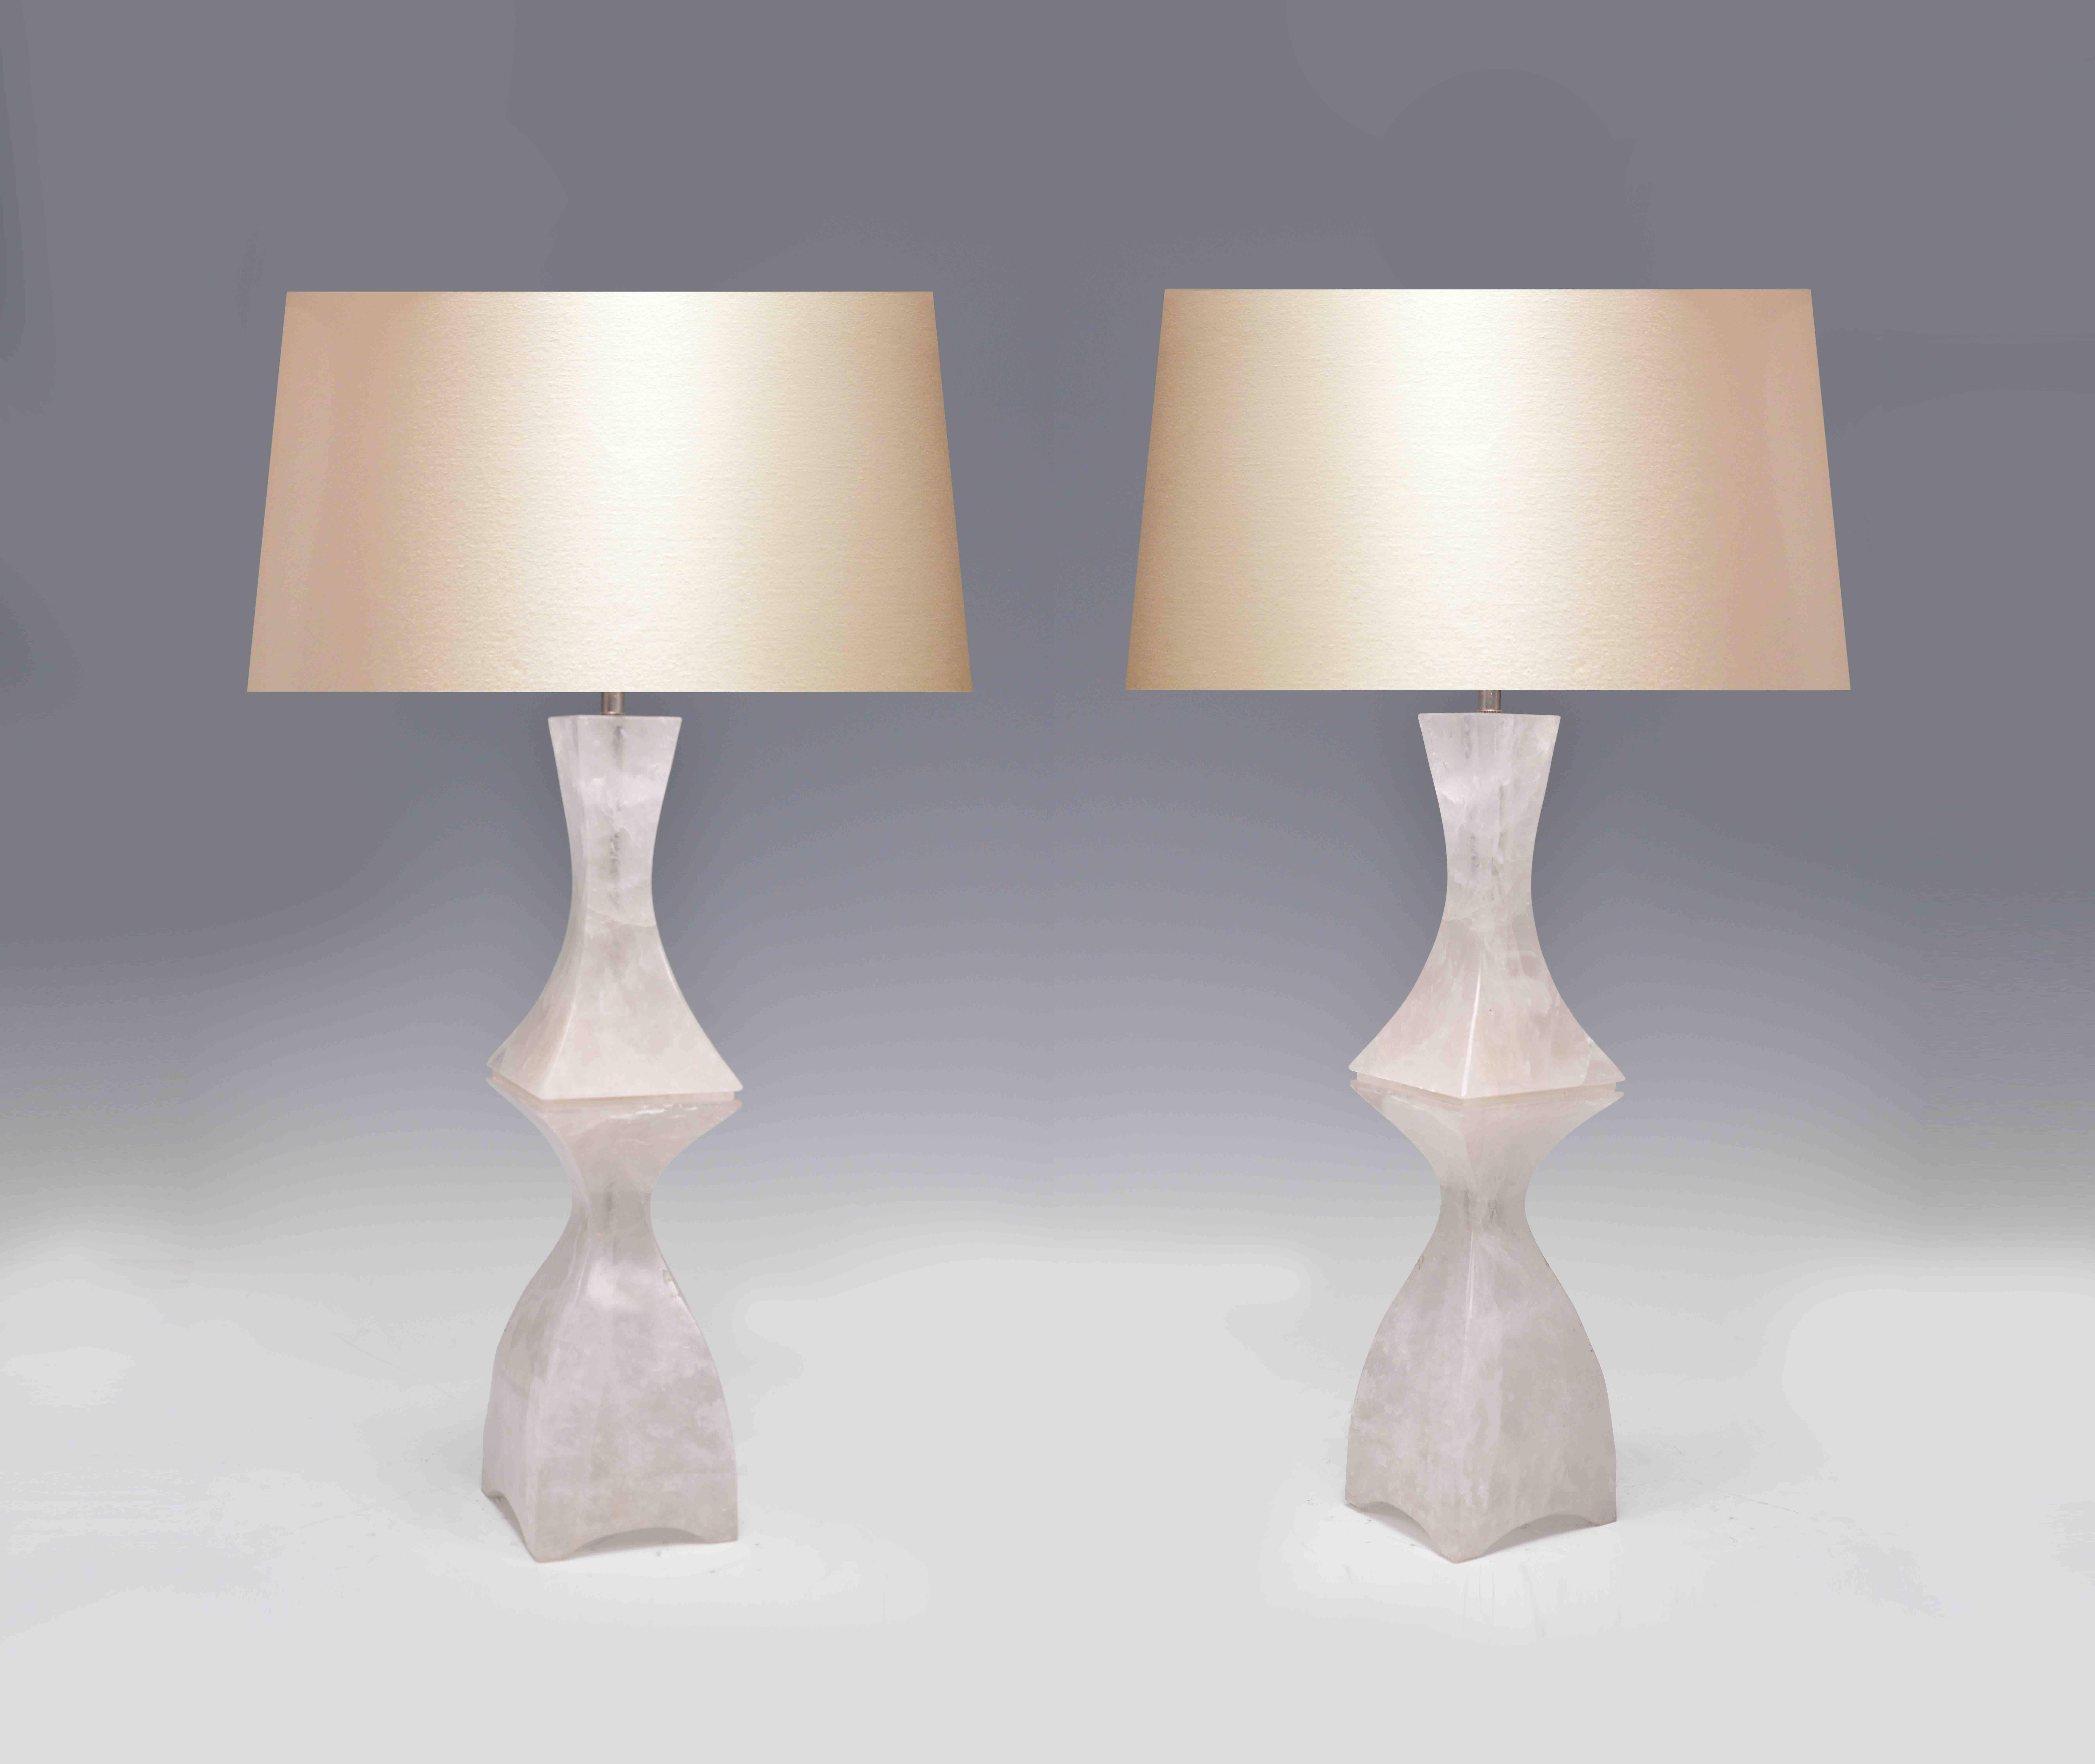 A pair of fine carved elegant form modern rock crystal lamps, created by Phoenix Gallery, NYC.
To the top of rock crystal is 20 in H, the dimensions of the base are: 5.5 in W x 5.5 in D.
(Lampshade not included)
